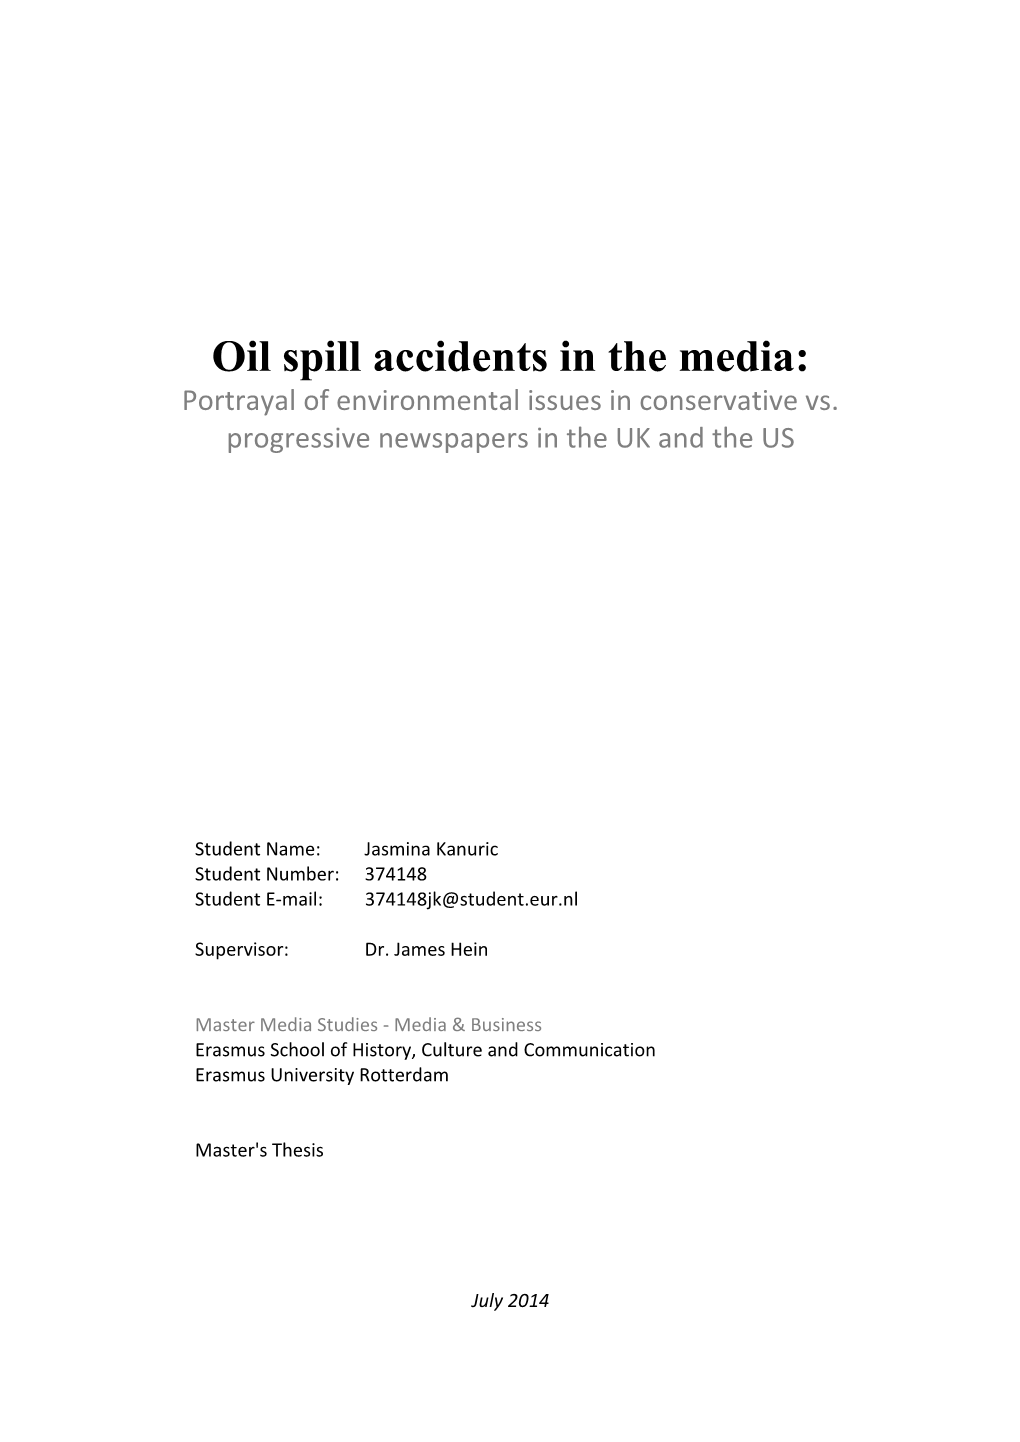 Oil Spill Accidents in the Media: Portrayal of Environmental Issues in Conservative Vs